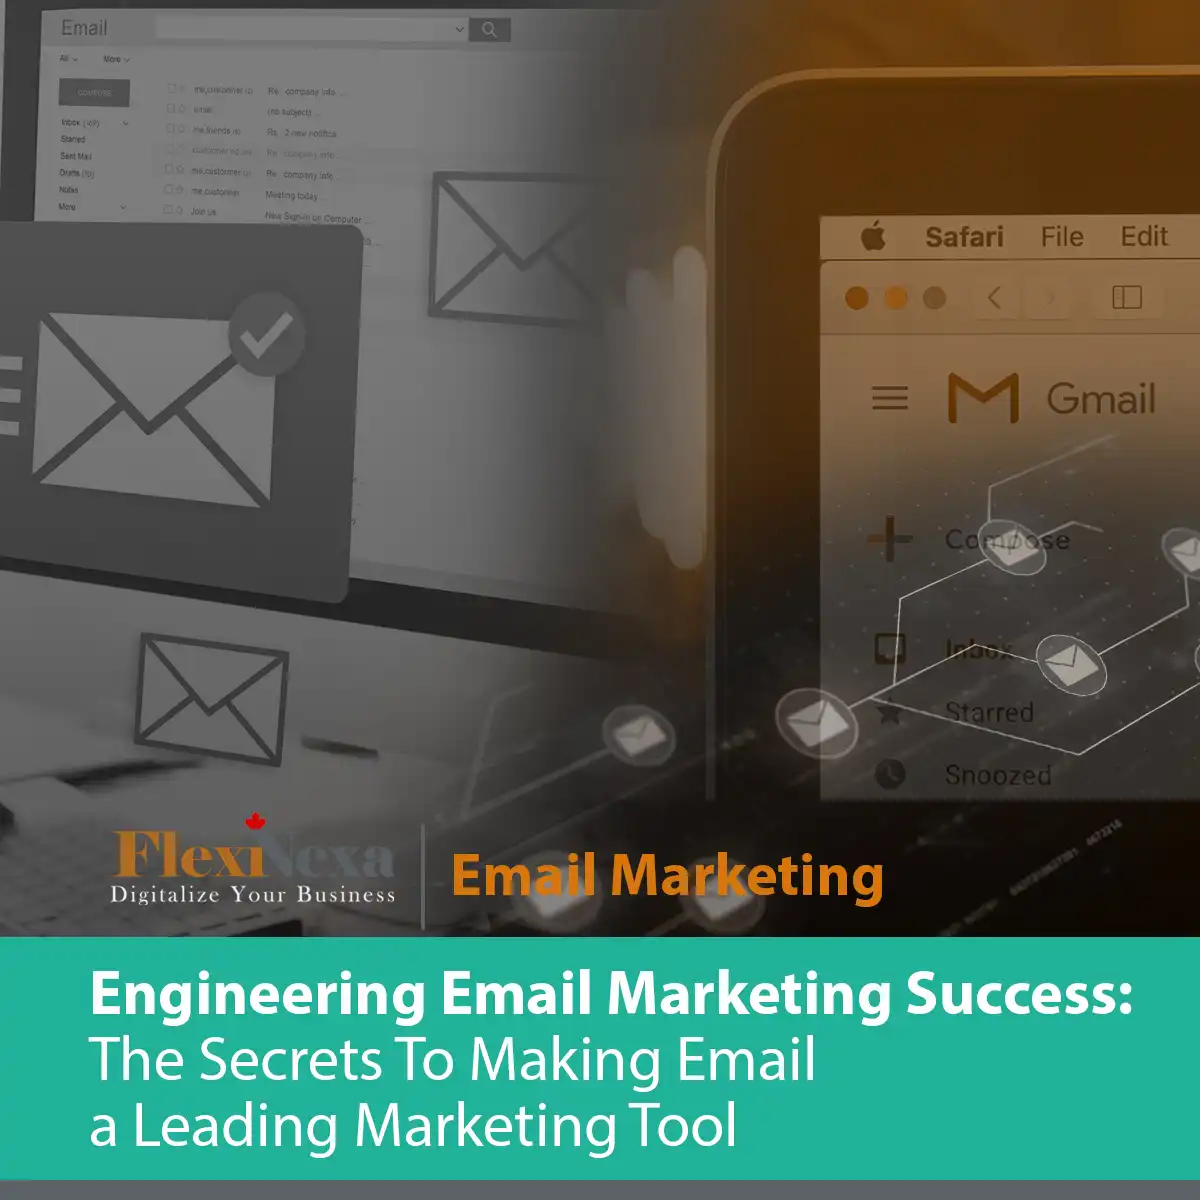 Engineering Email Marketing Success: The Secrets To Making Email A Leading Marketing Tool